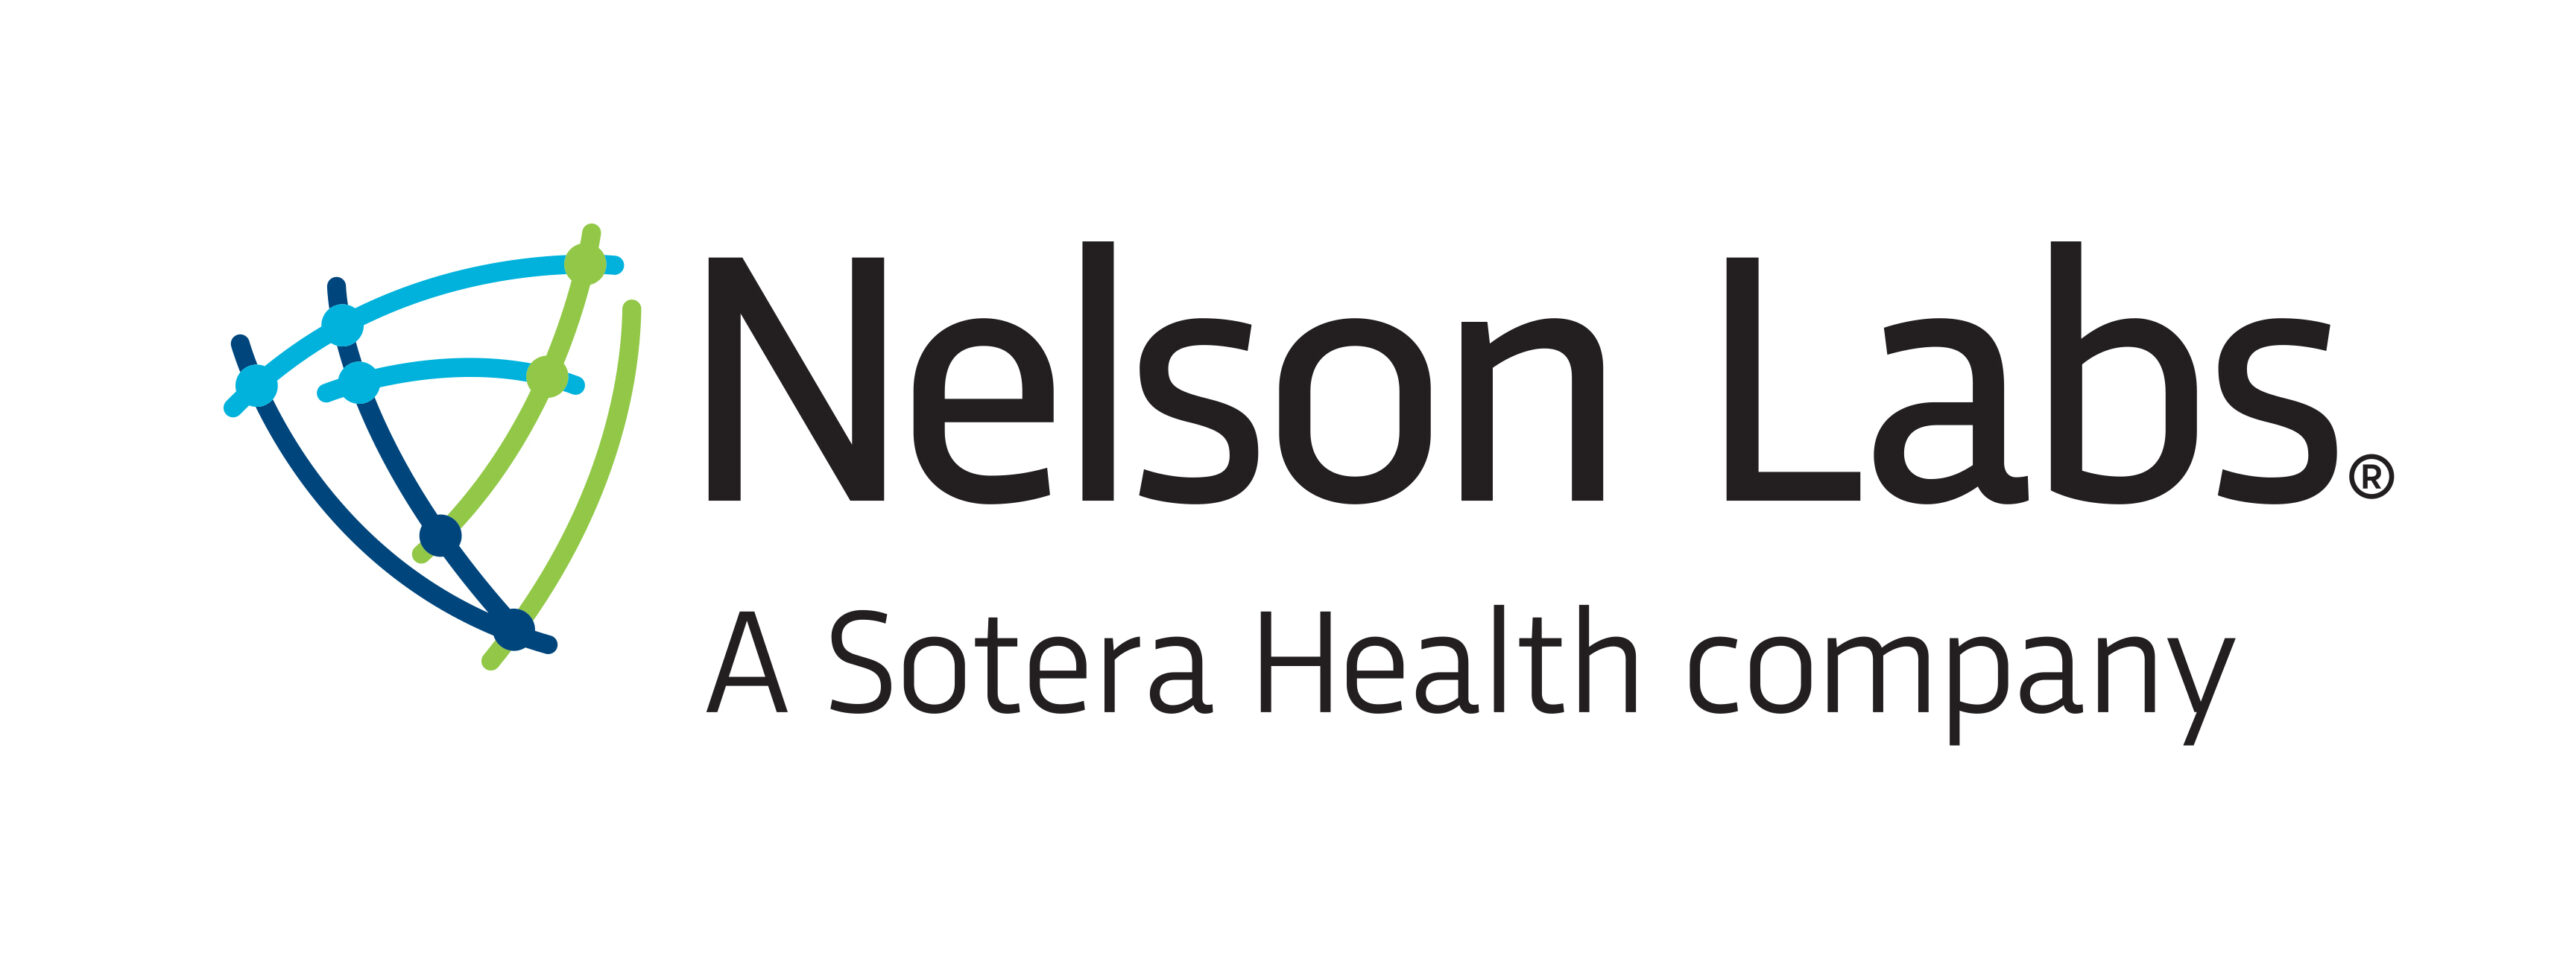 Nelson labs